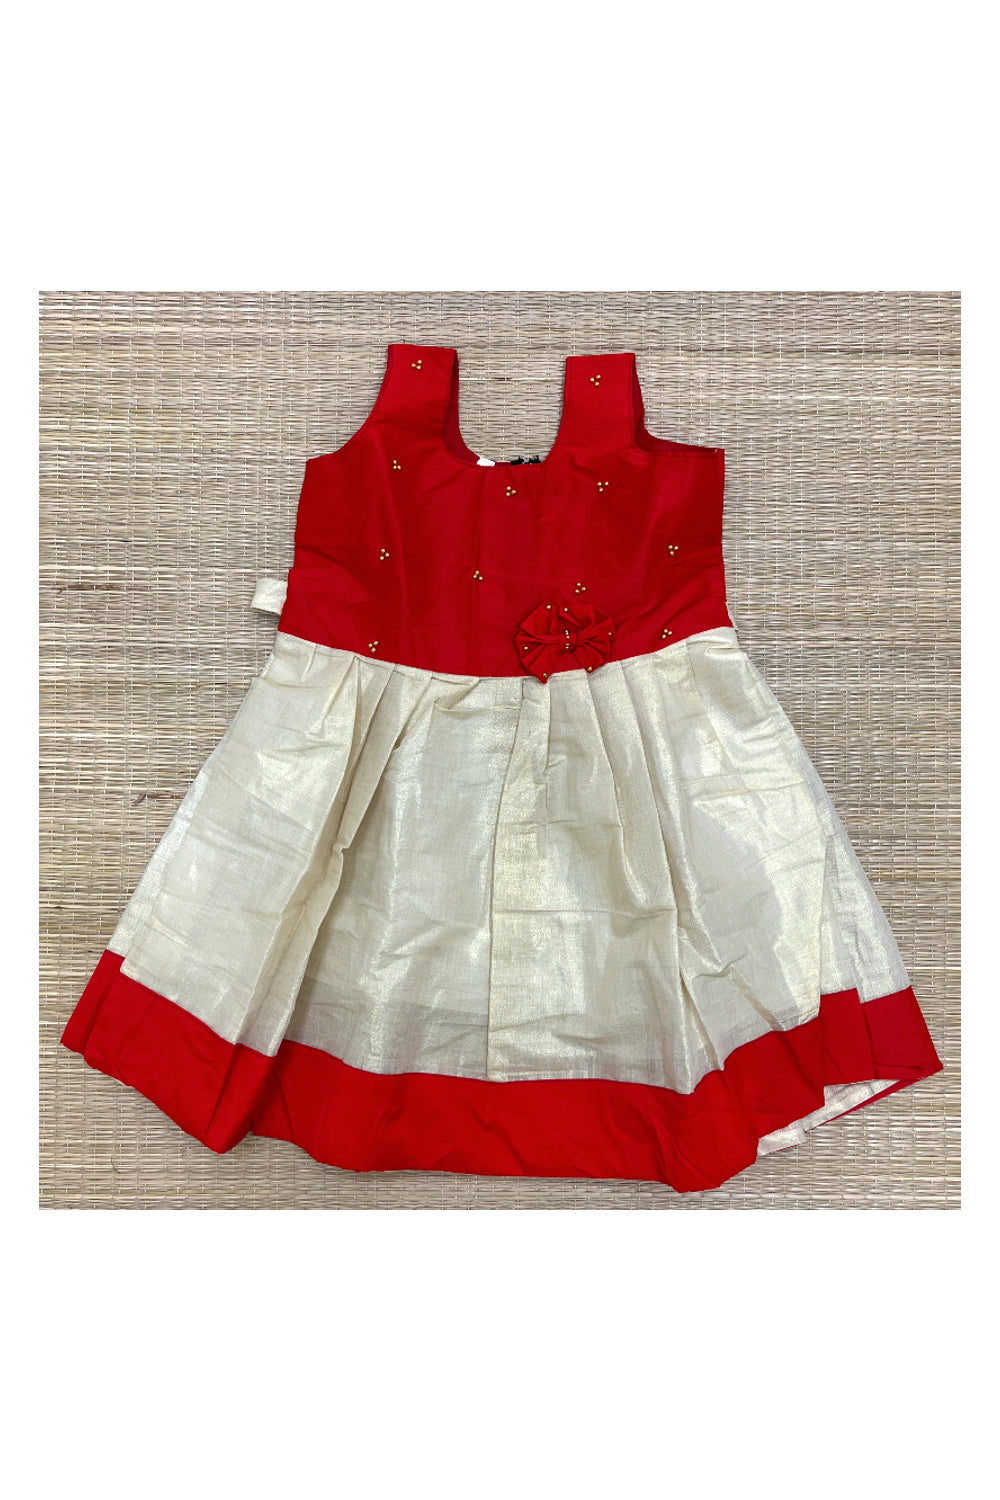 Southloom Kerala Tissue Frock with Red Bead Work Designs for Kids (4 Years)